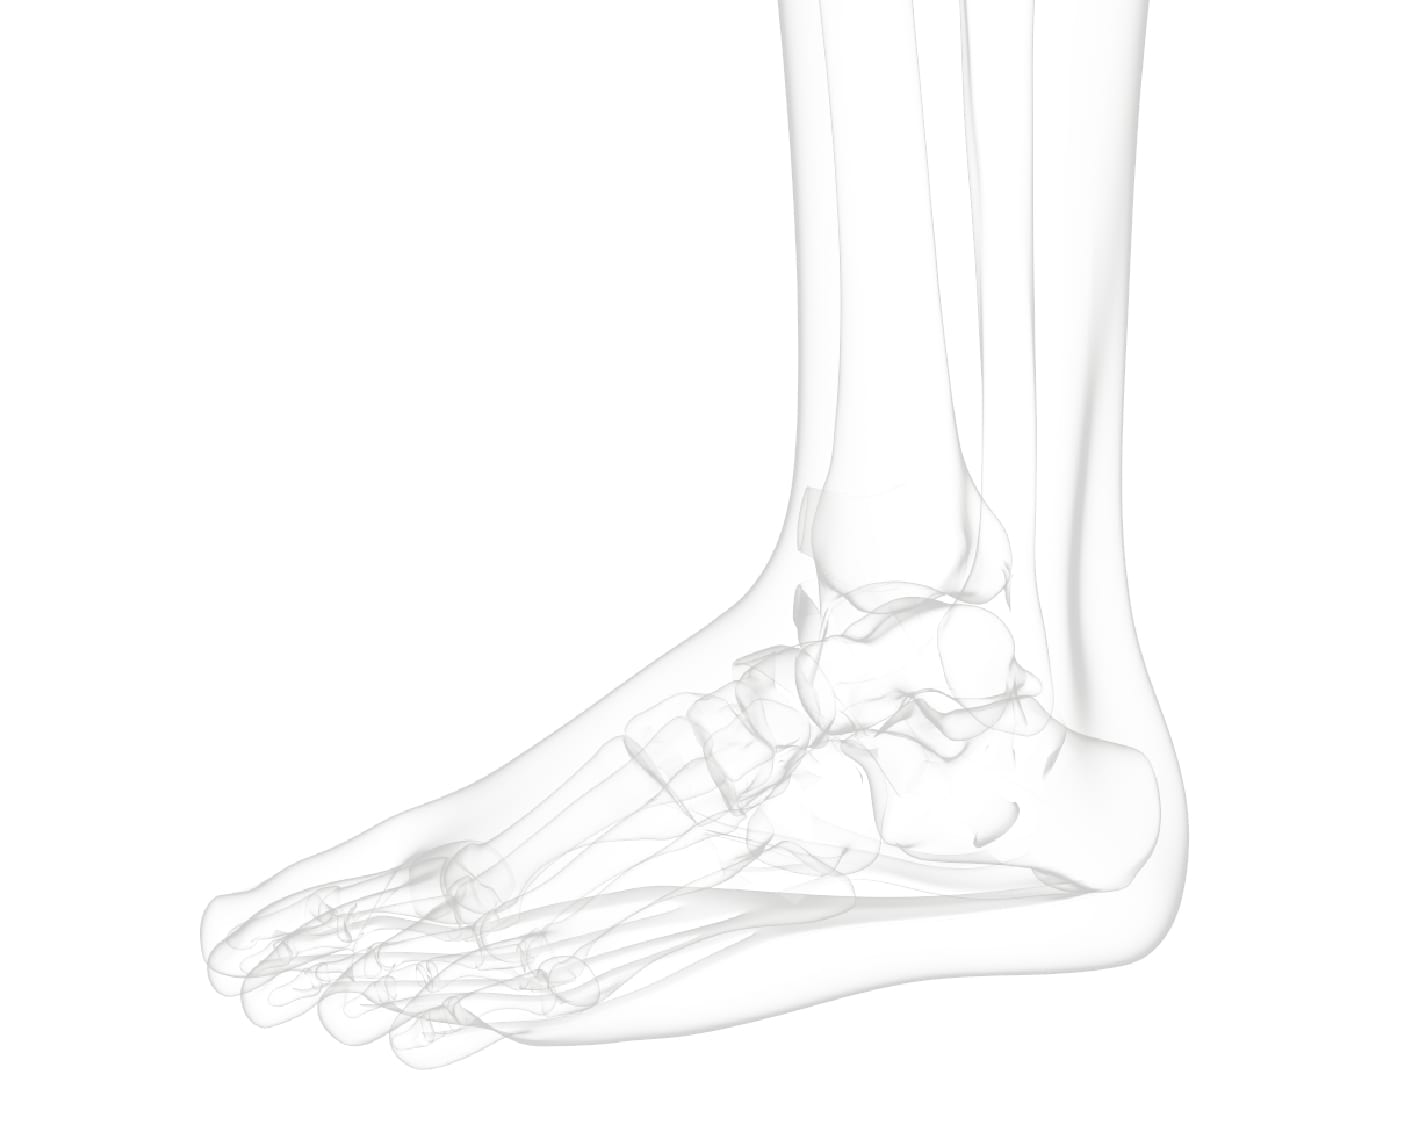 foot-ankle-1 background shade